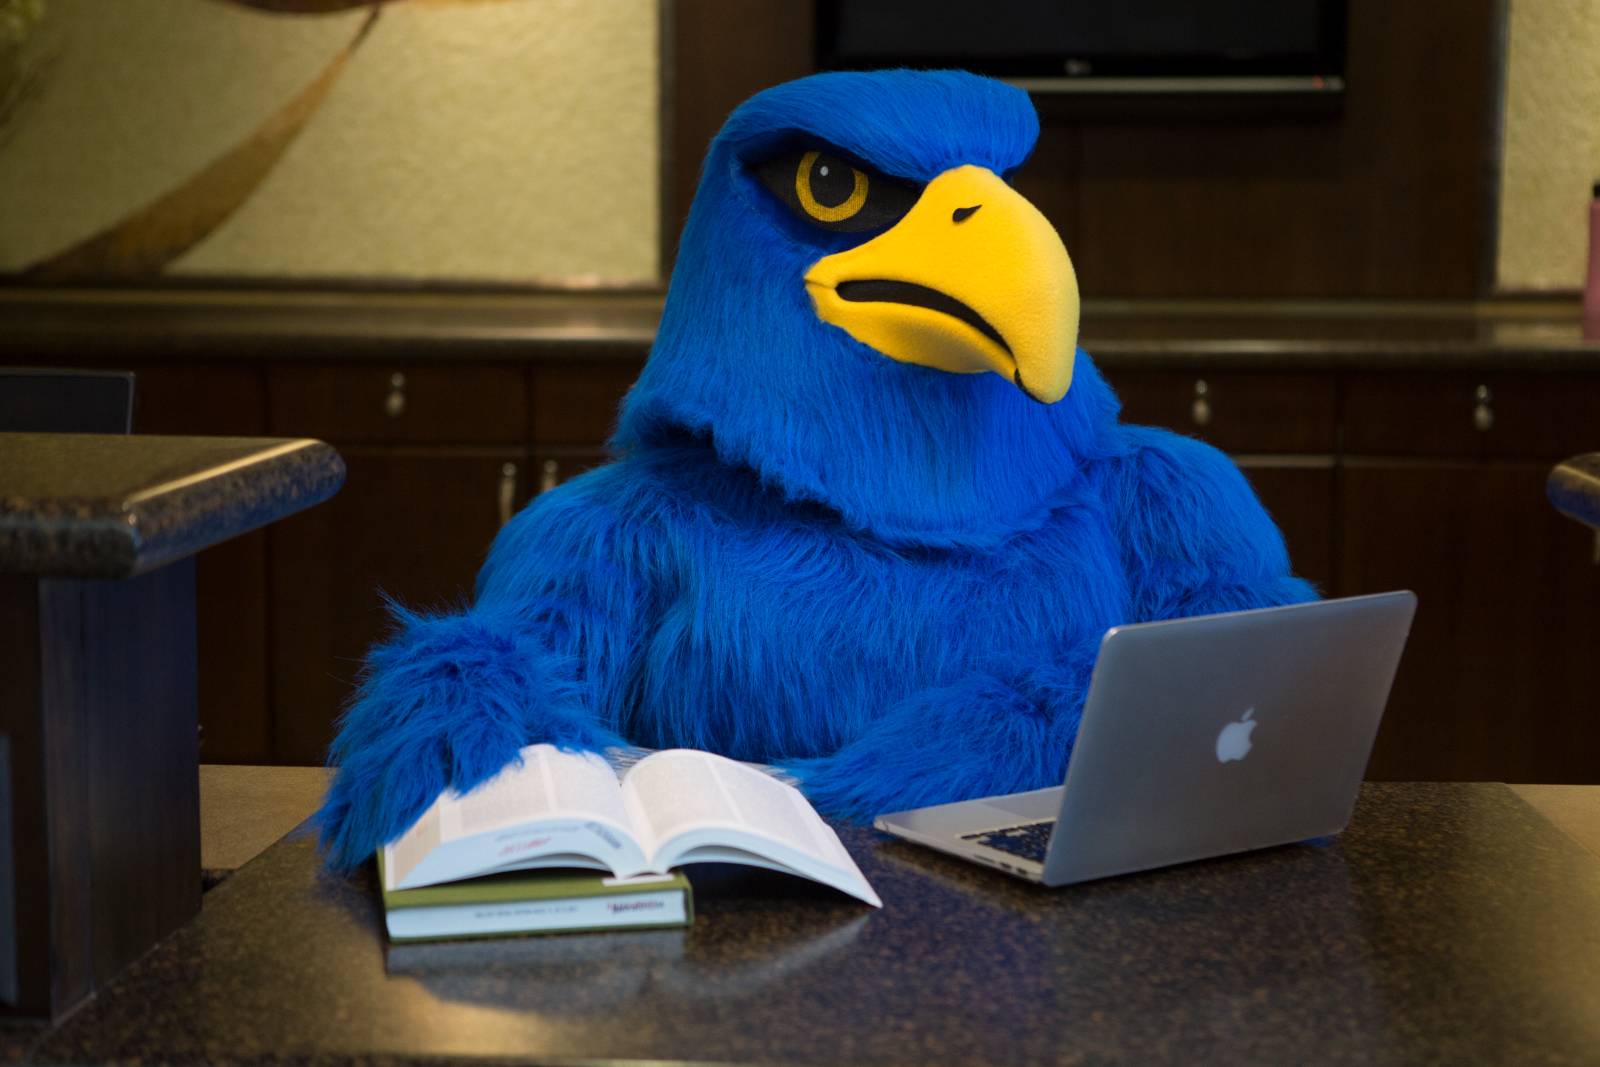 Freddie Falcon at desk with laptop and book